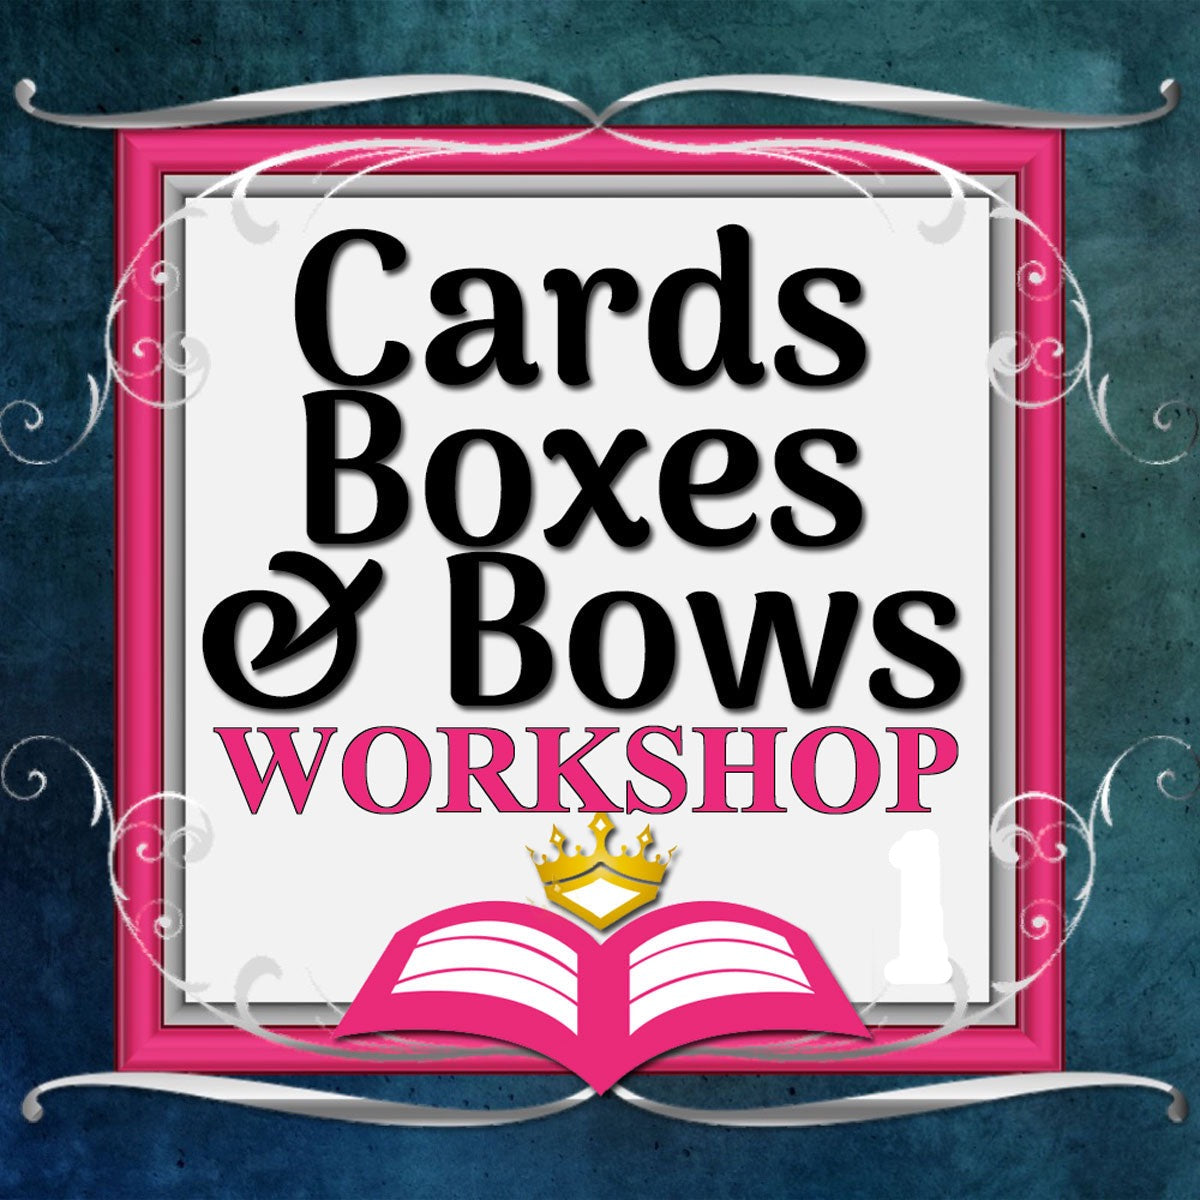 Cards, Boxes & Bows